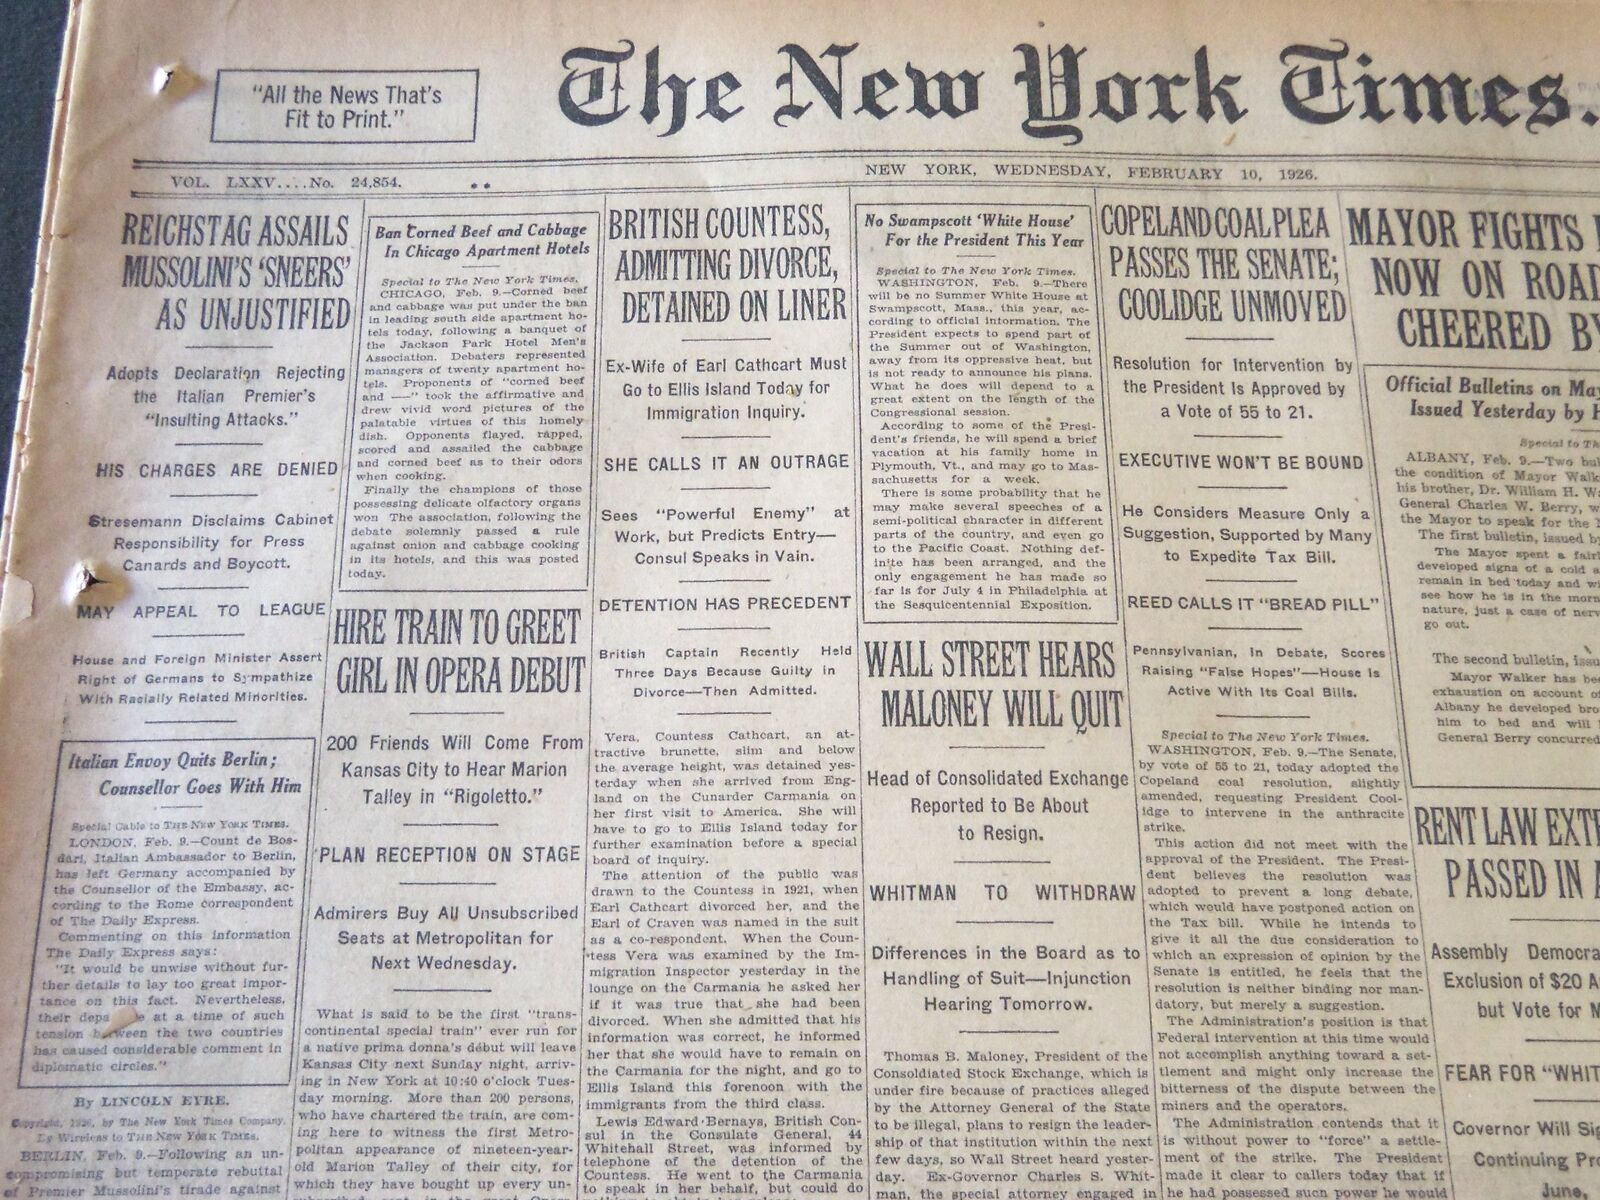 1926 FEBRUARY 10 NEW YORK TIMES - REICHSTAG ASSAILS MUSSOLINI'S SNEERS - NT 6607